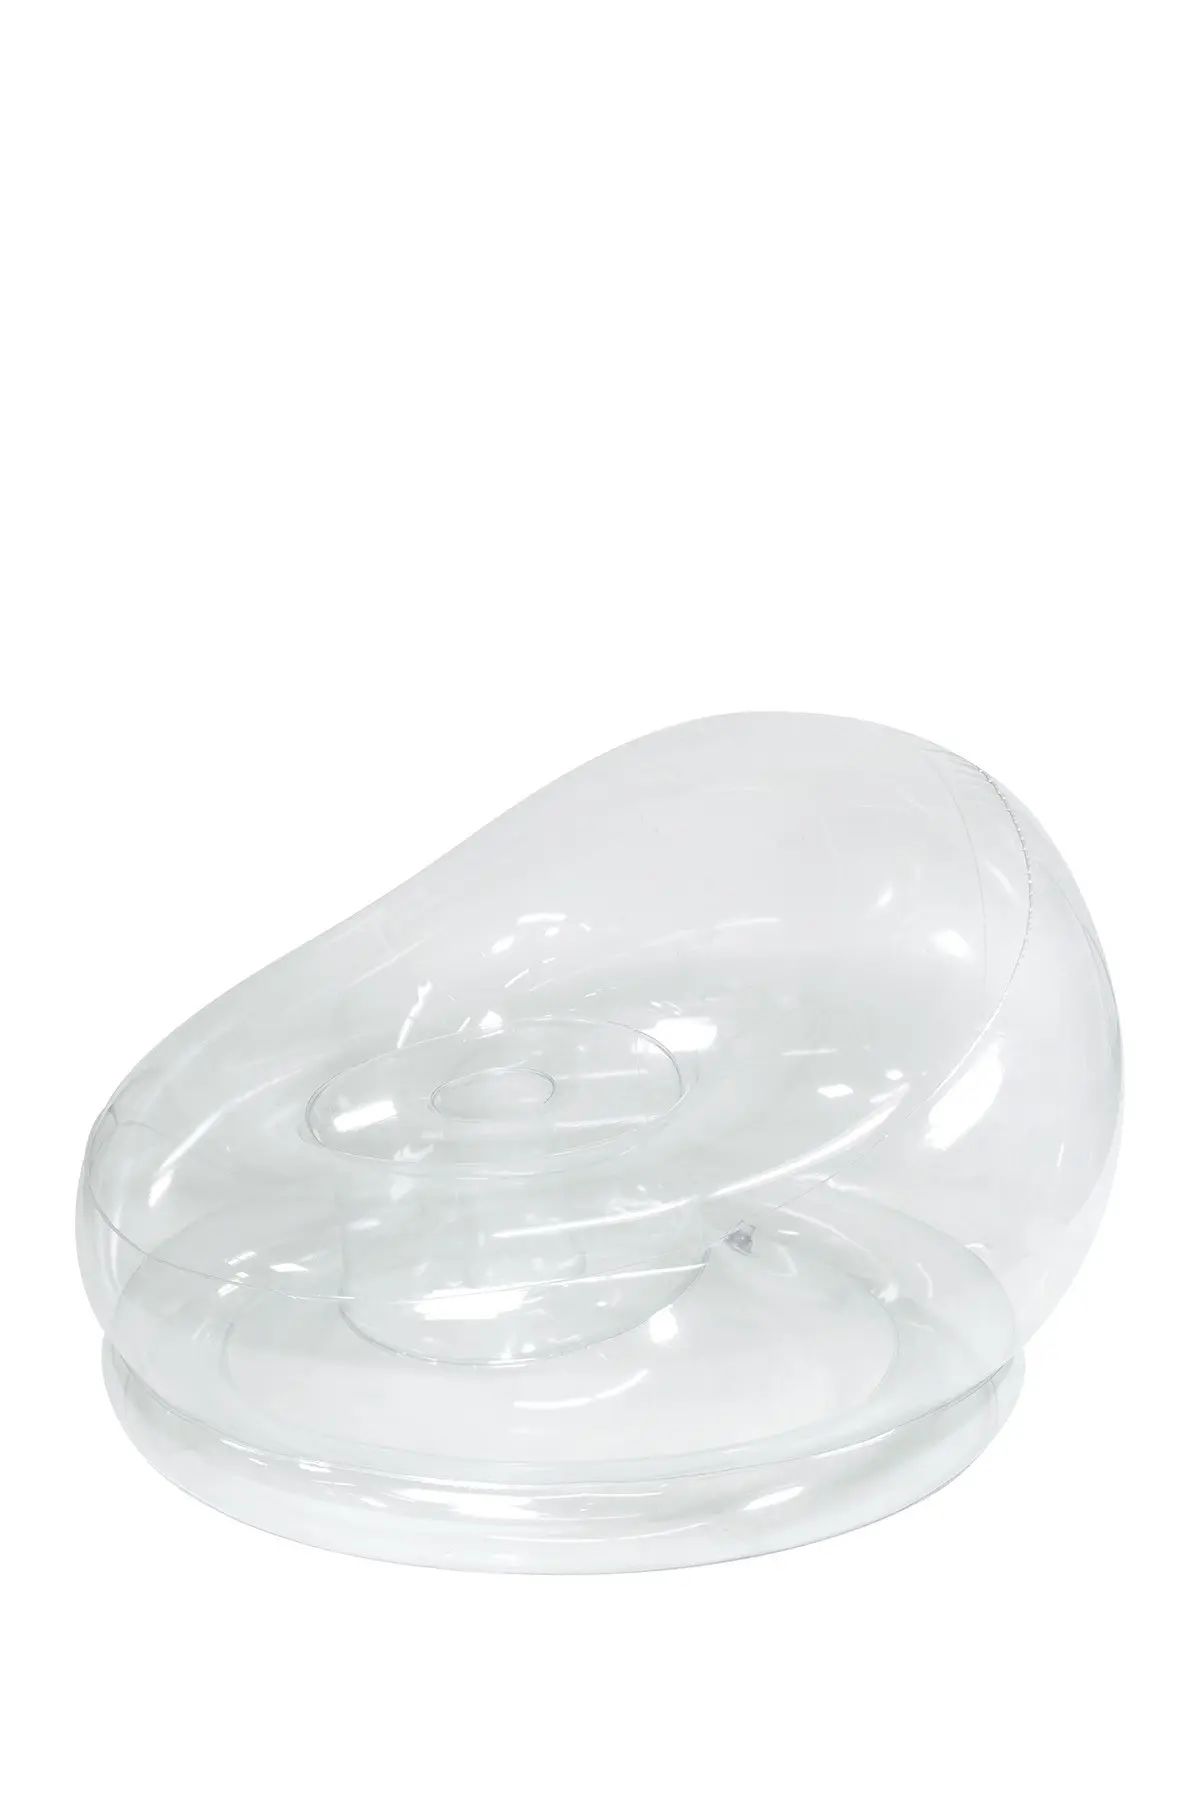 POOLCANDY AirCandy Inflatable Chair - Clear at Nordstrom Rack | Nordstrom Rack